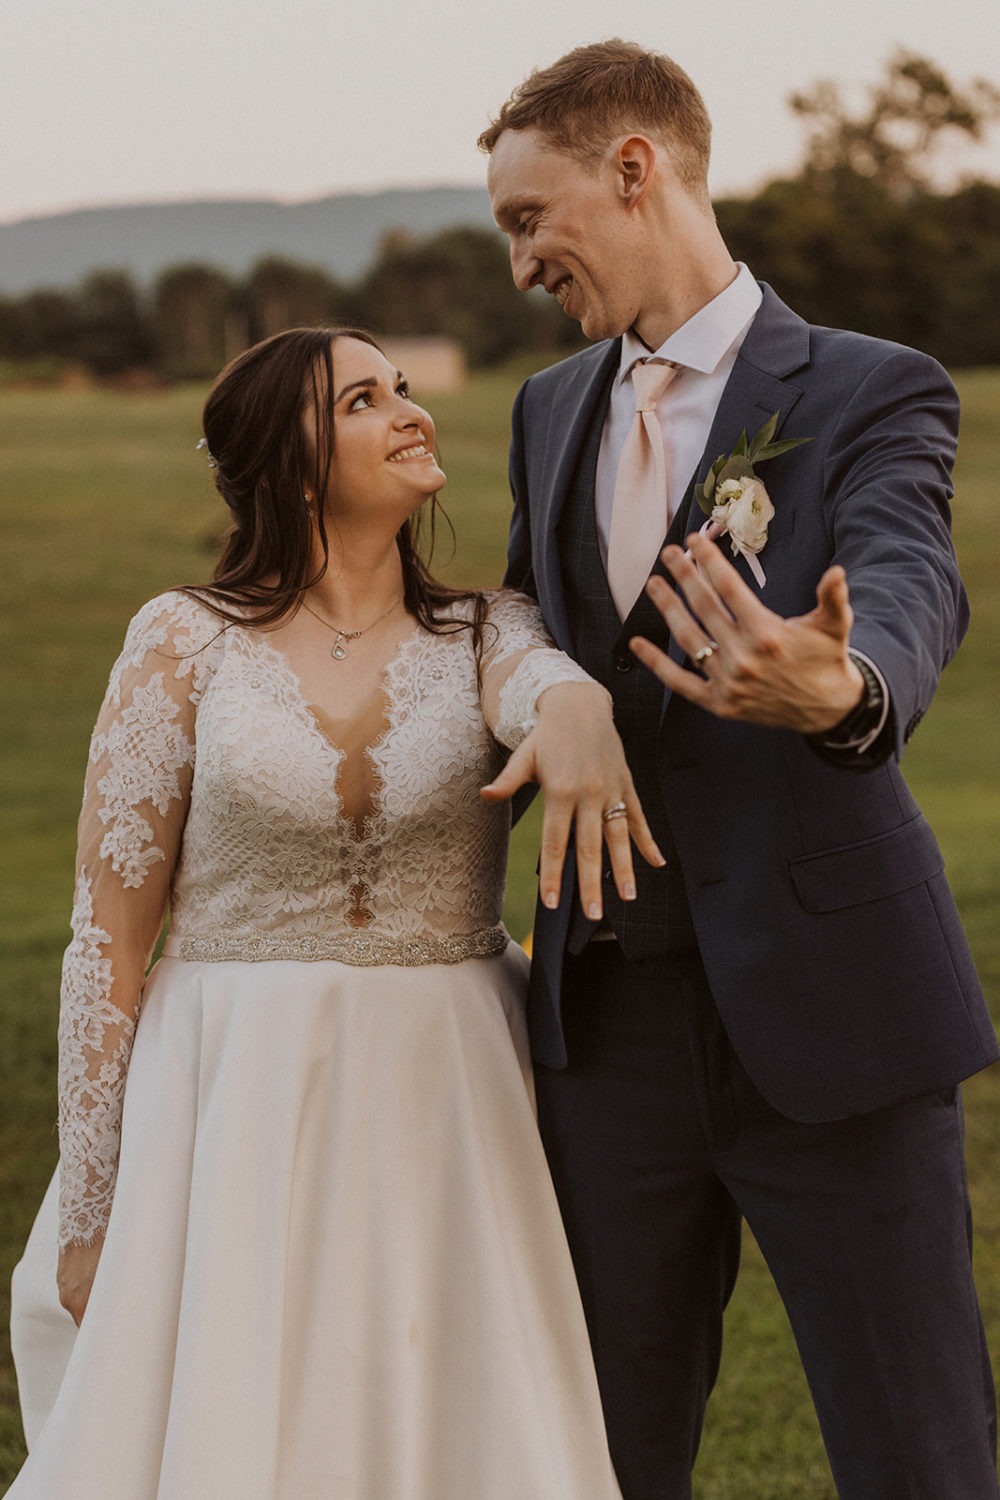 couple shows rings on hands at farm sunset wedding